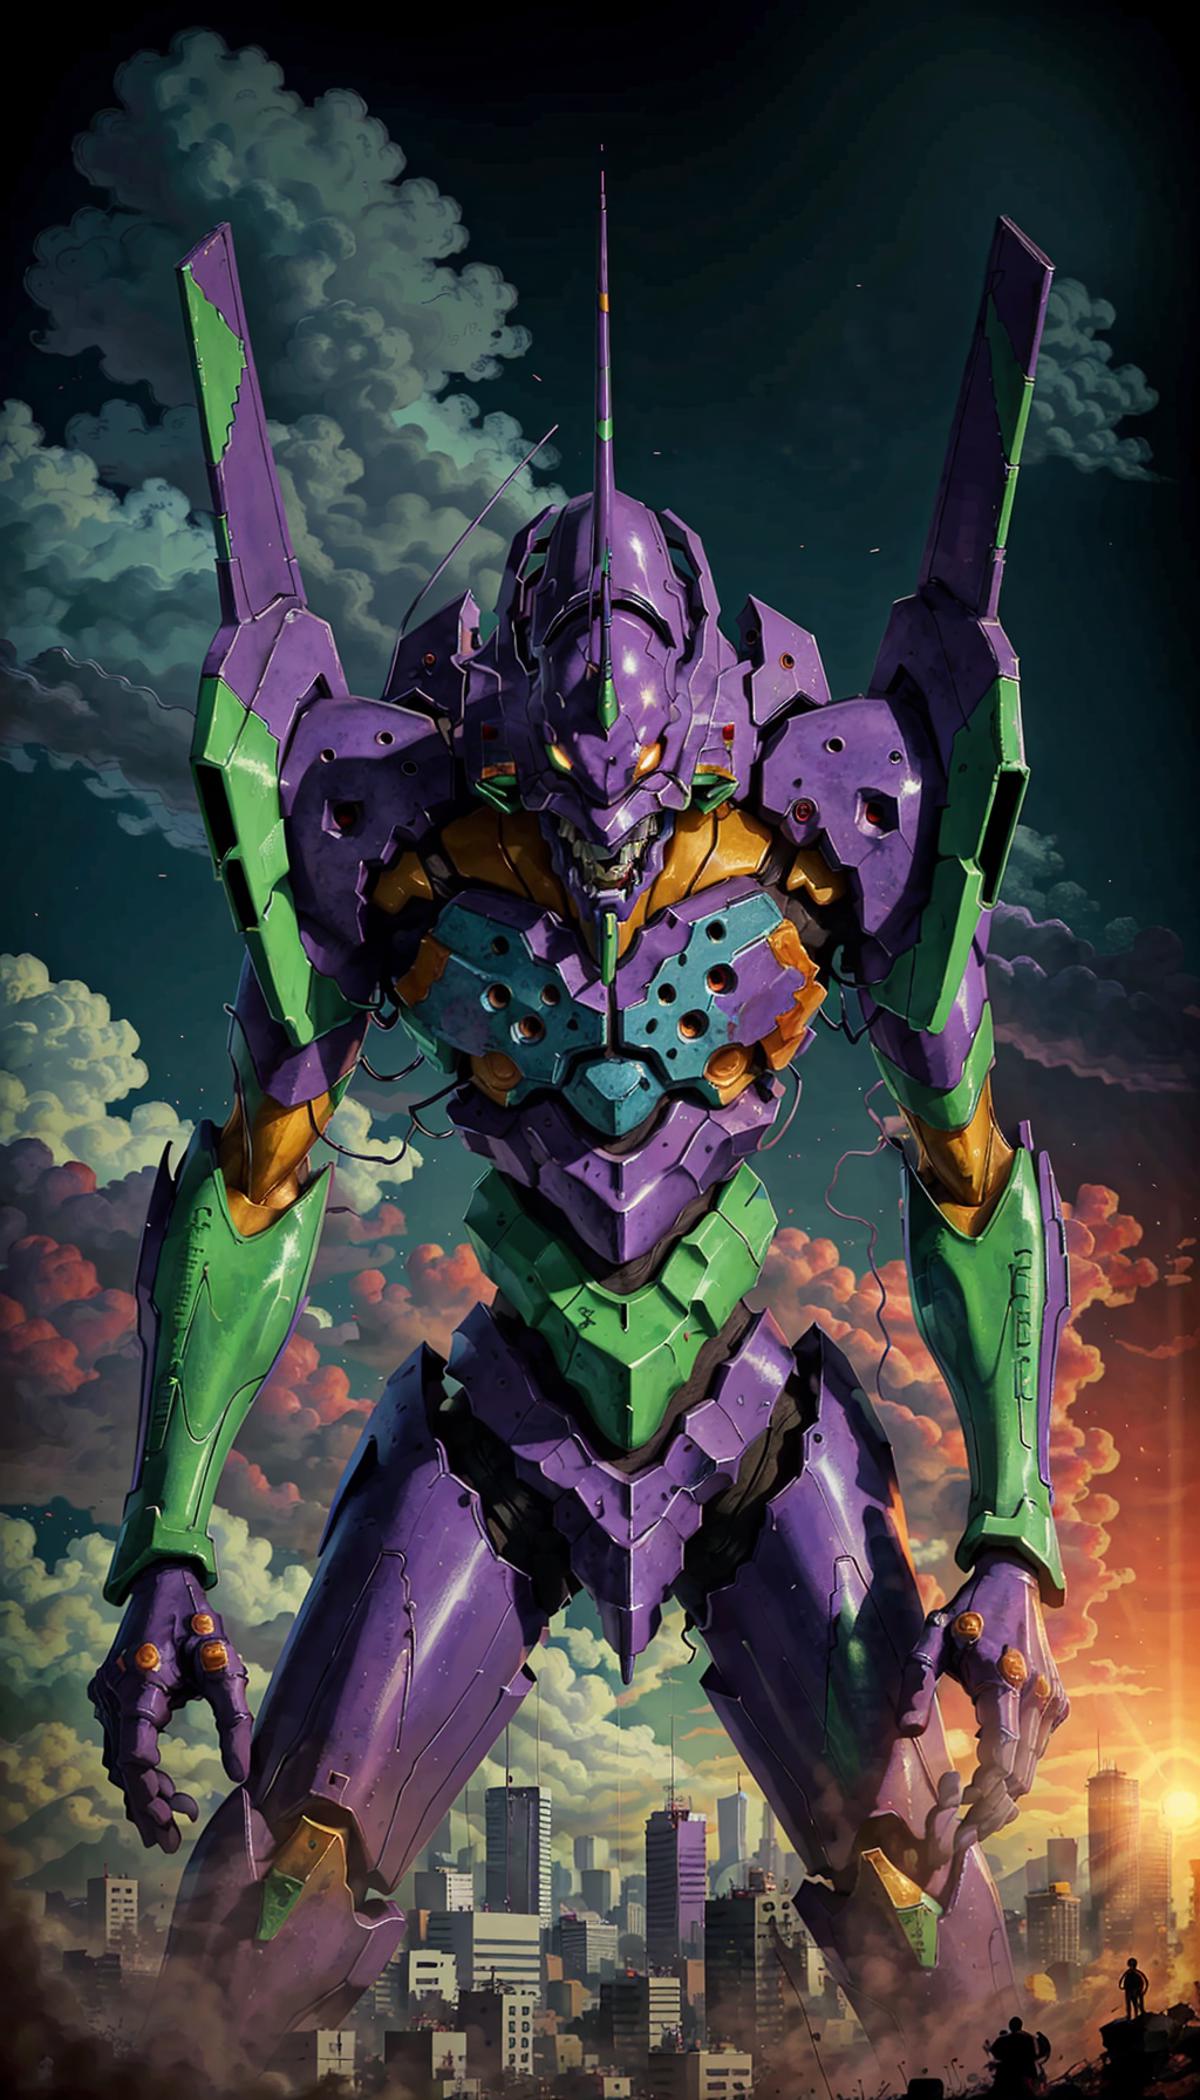 A giant purple robot with green arms and yellow legs stands on a cloudy day.